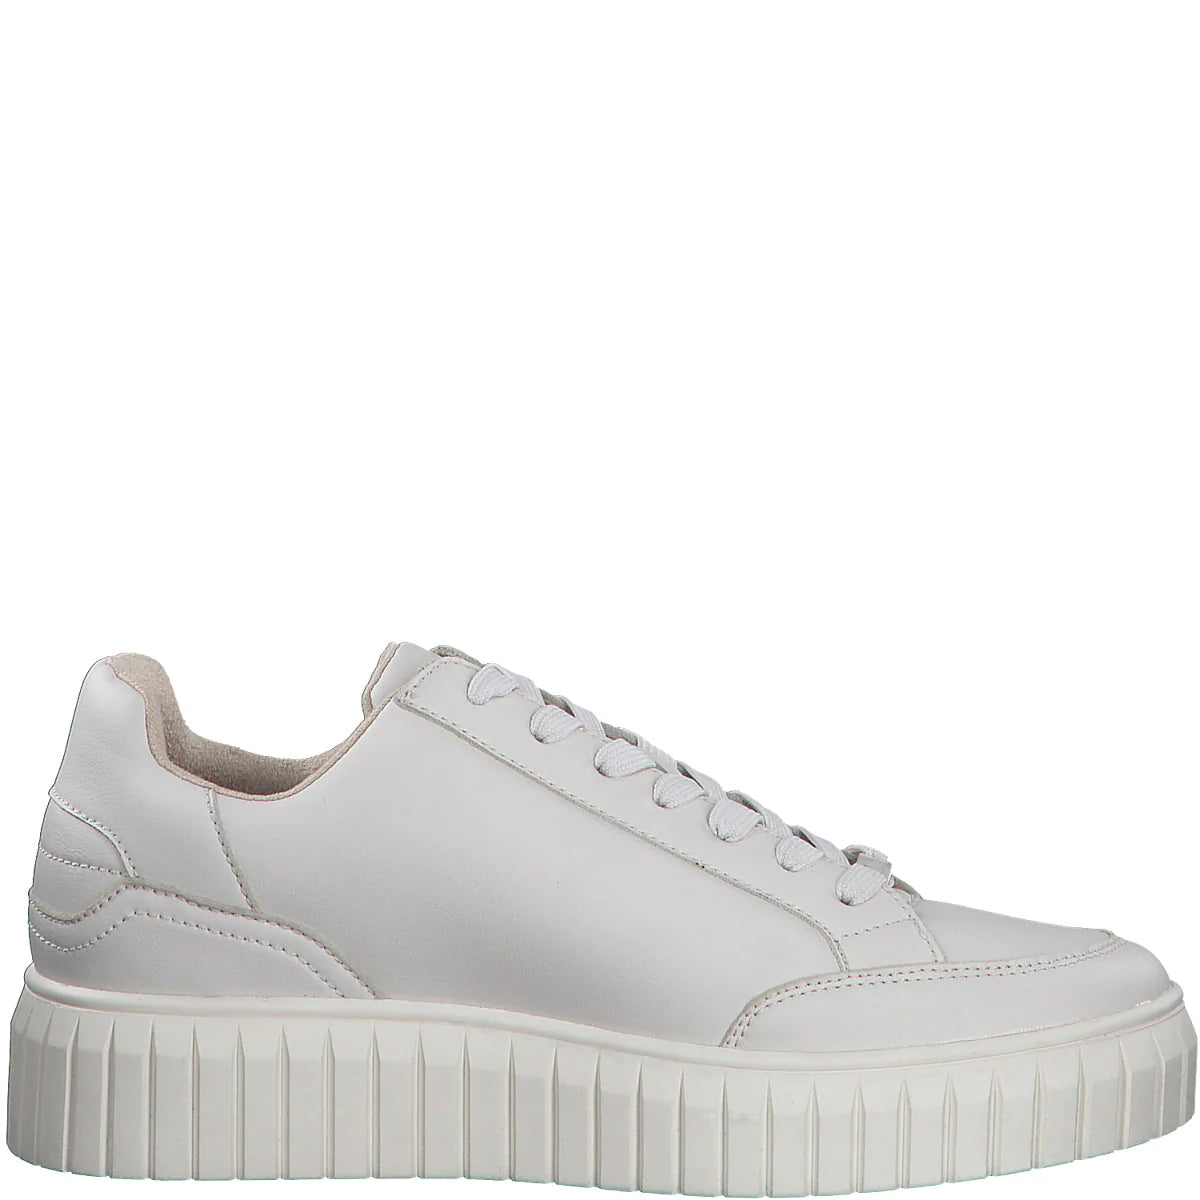 S.OLIIVER LACE-UP SNEAKERS IN GREY